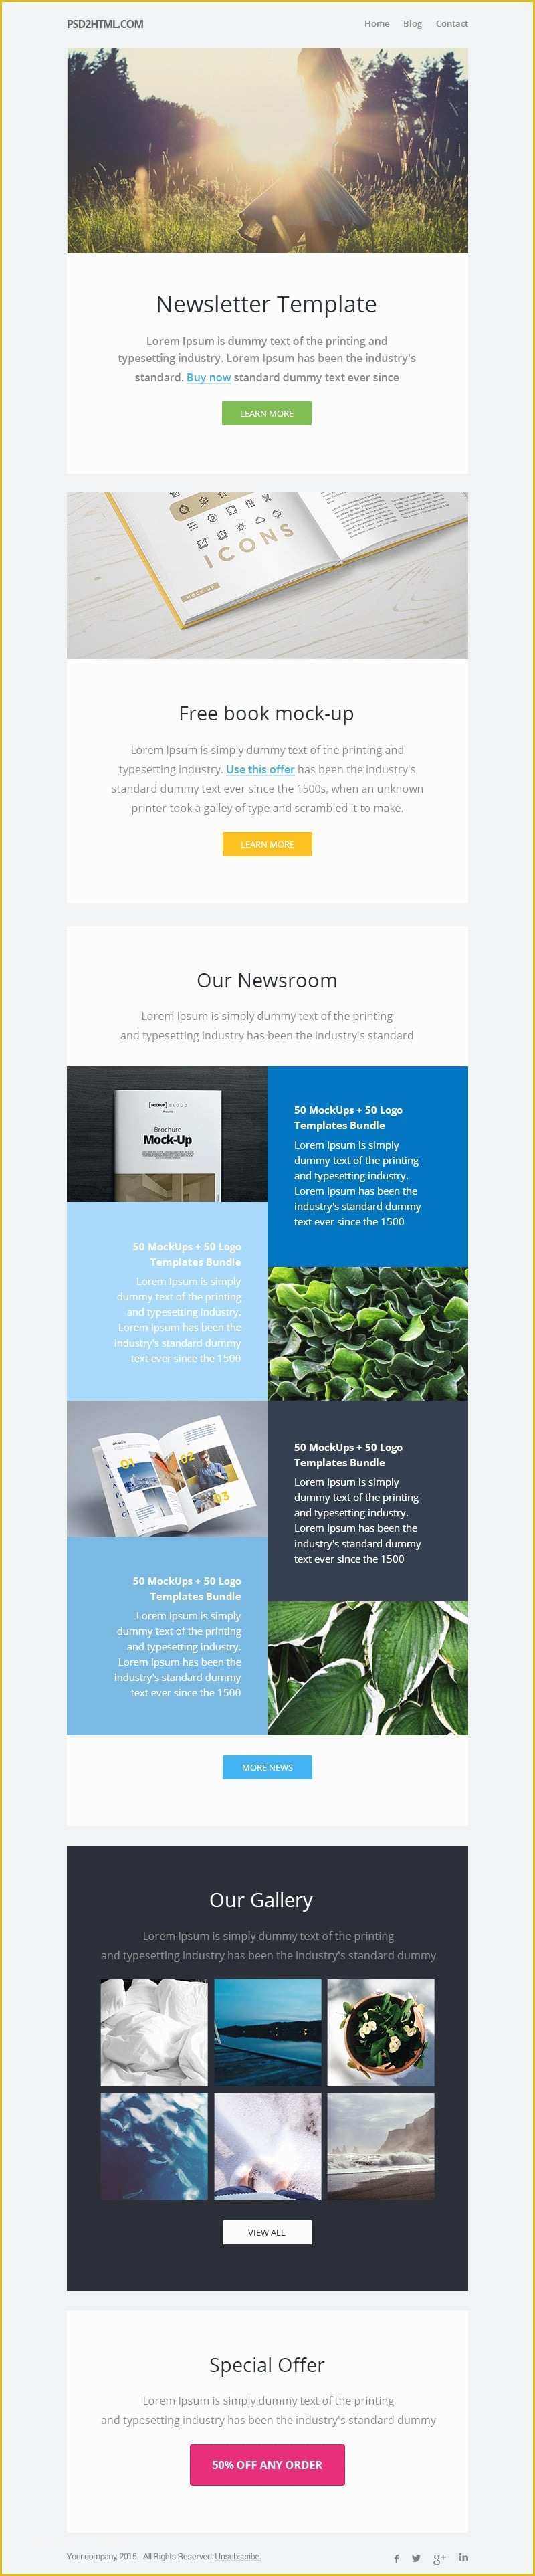 Free Newsletter Templates Of Free Email Newsletter Templates Psd Css Author